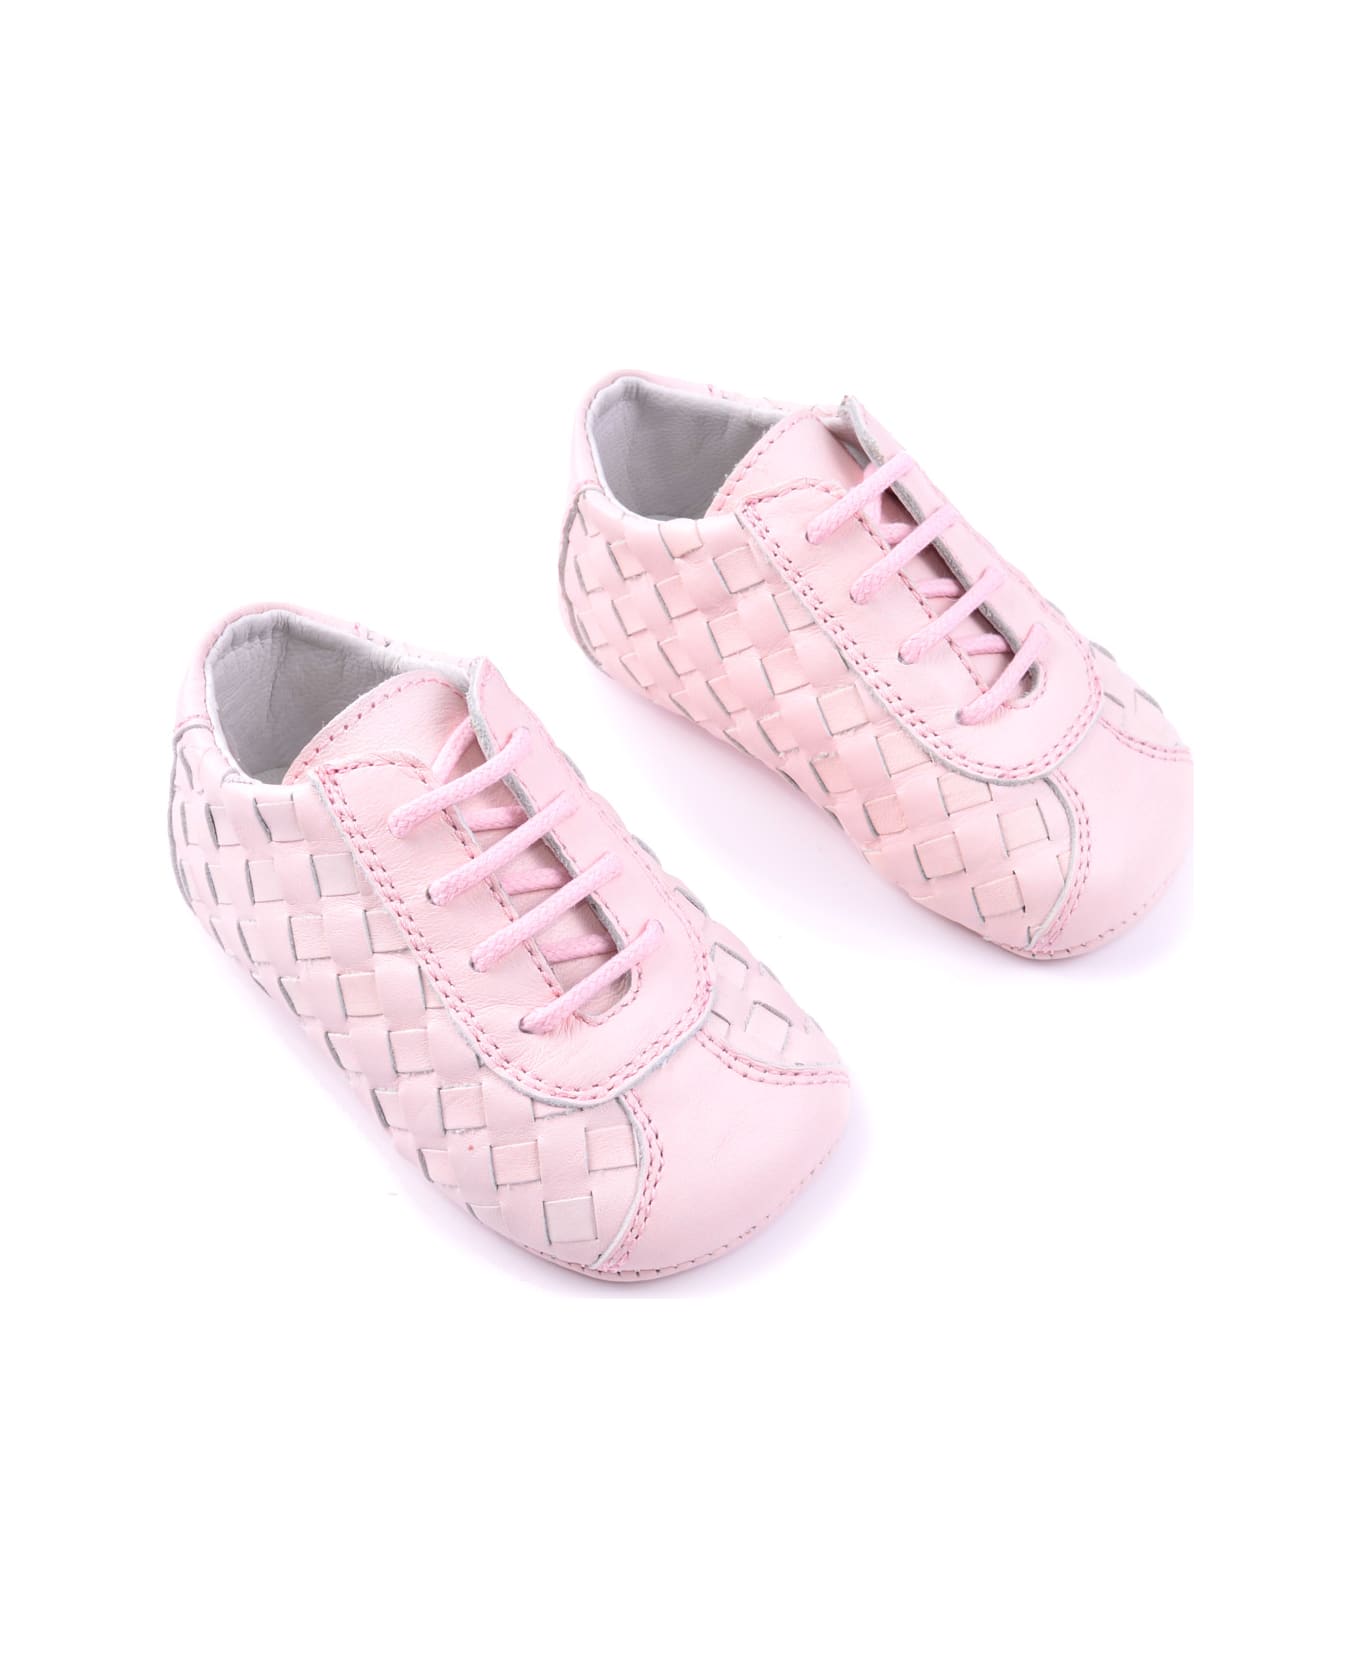 Gallucci Leather Lace-up Shoes With Woven Effect - Rose